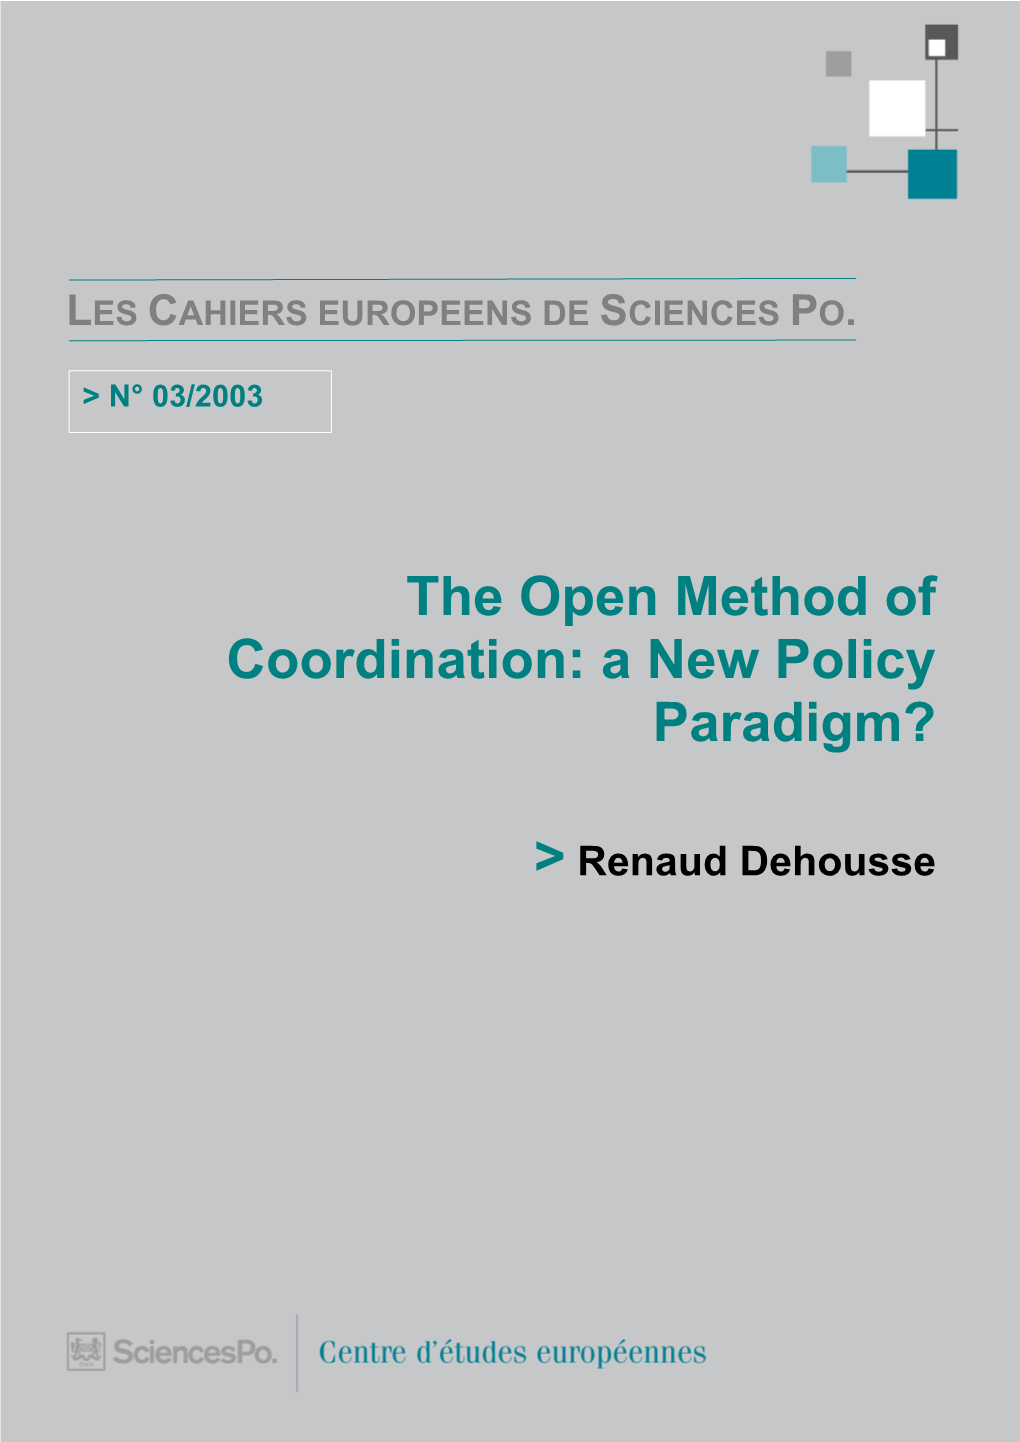 The Open Method of Coordination: a New Policy Paradigm?